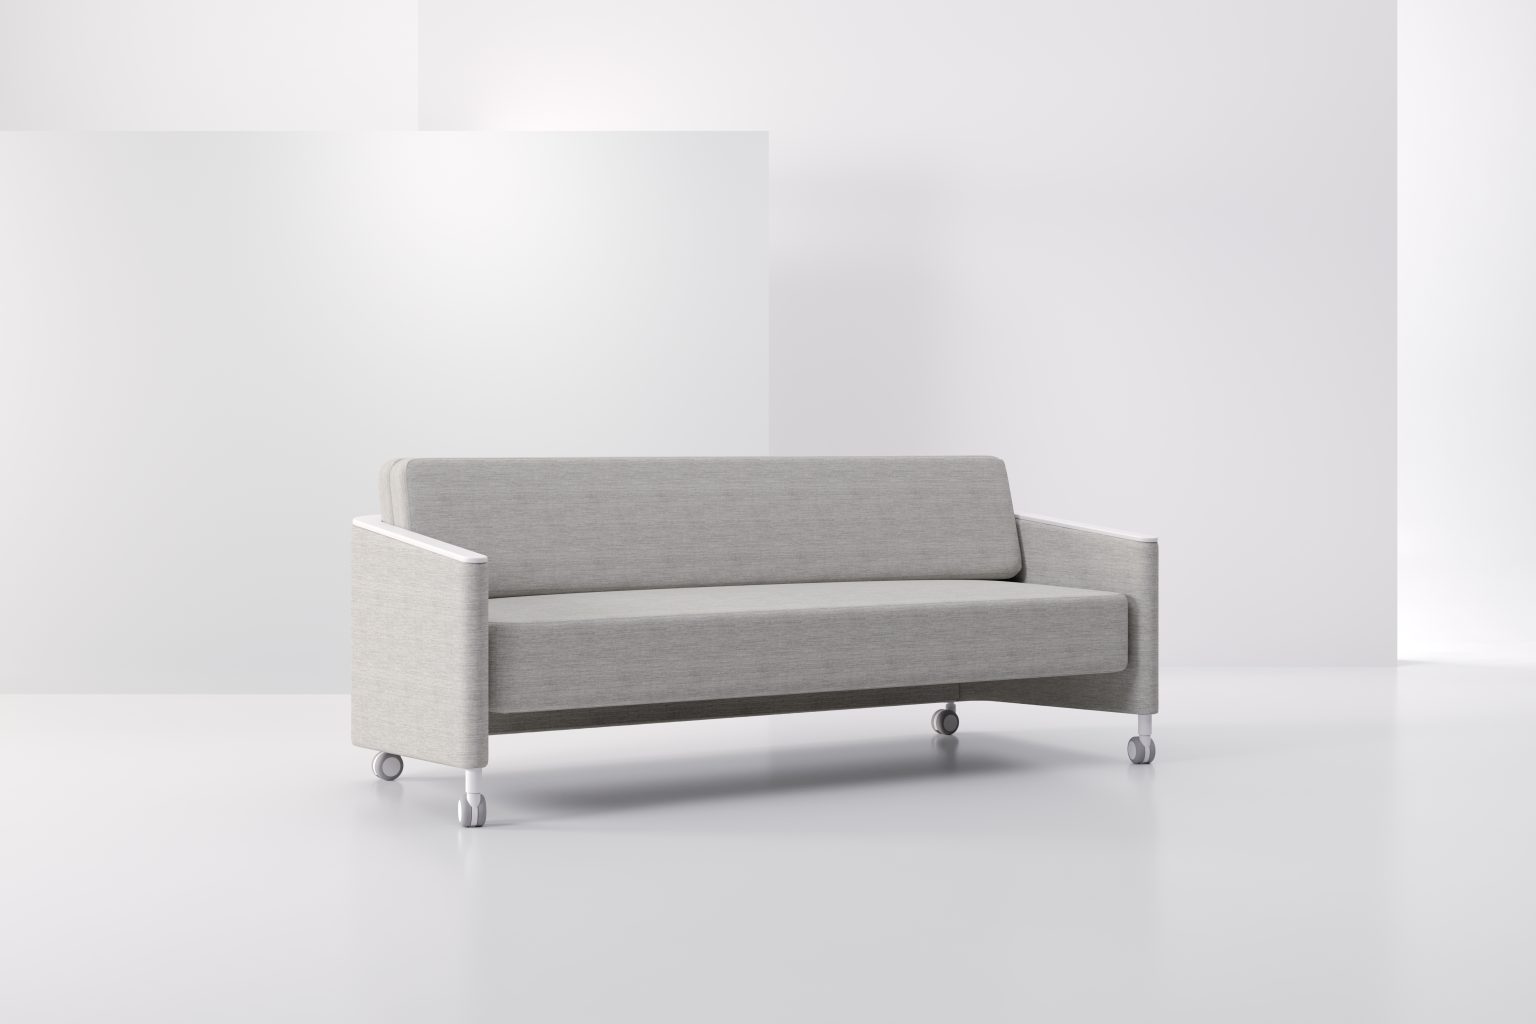 Rochester Flop Sofa Product Image 4